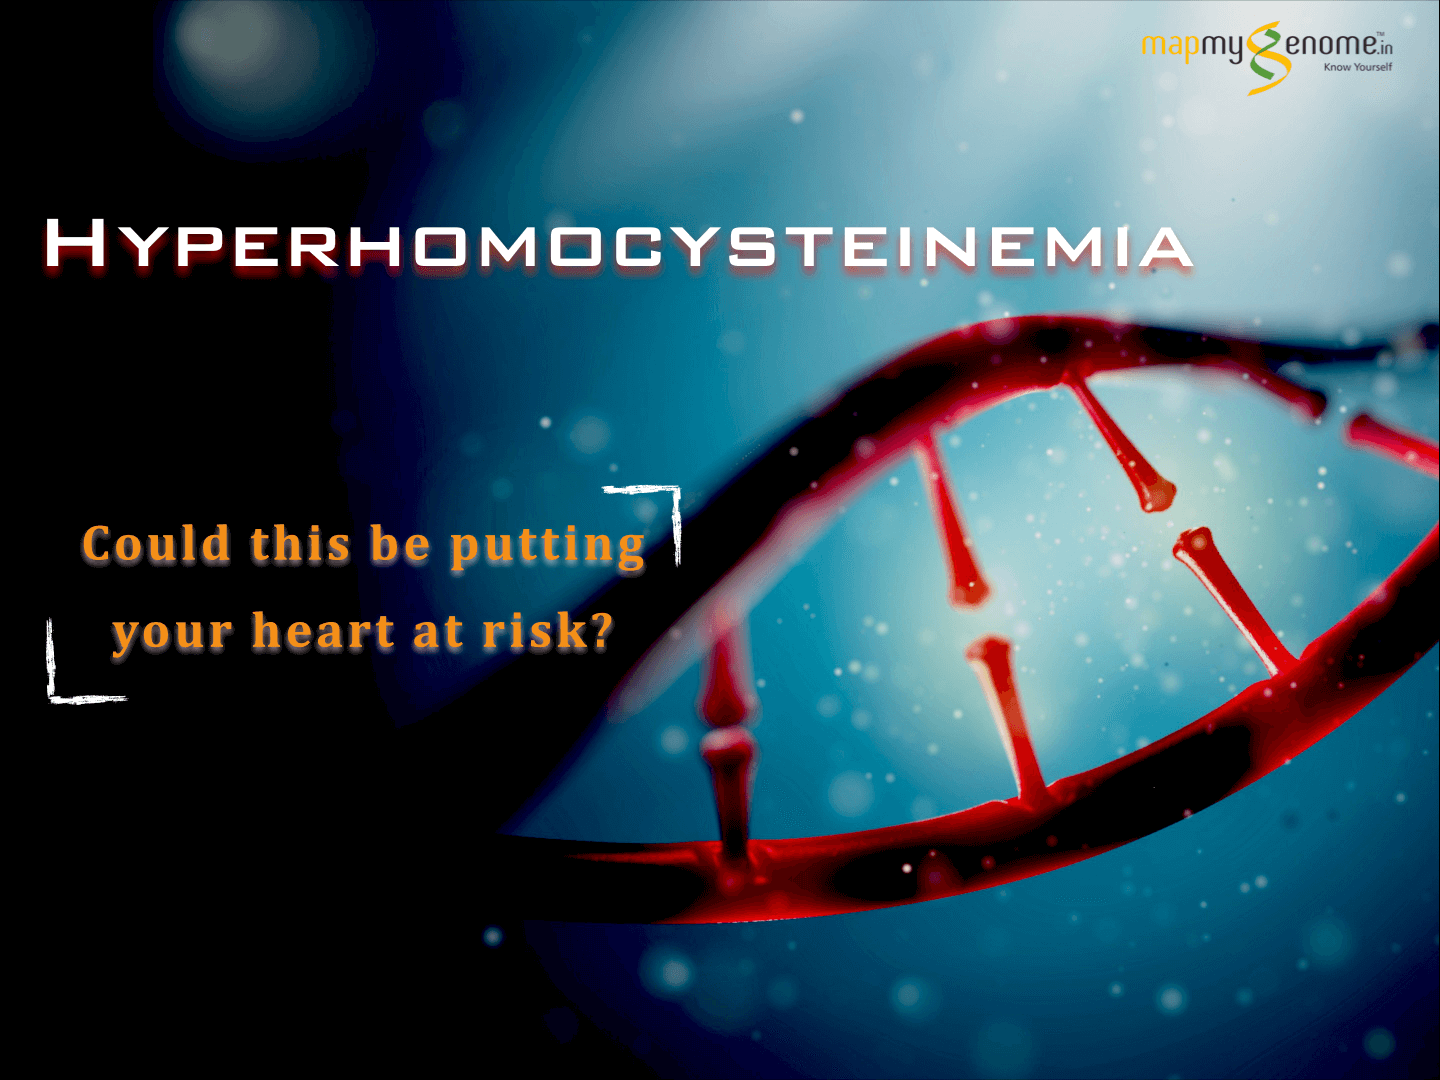 Hyperhomocysteinemia: Is It Putting Your Heart at Risk?